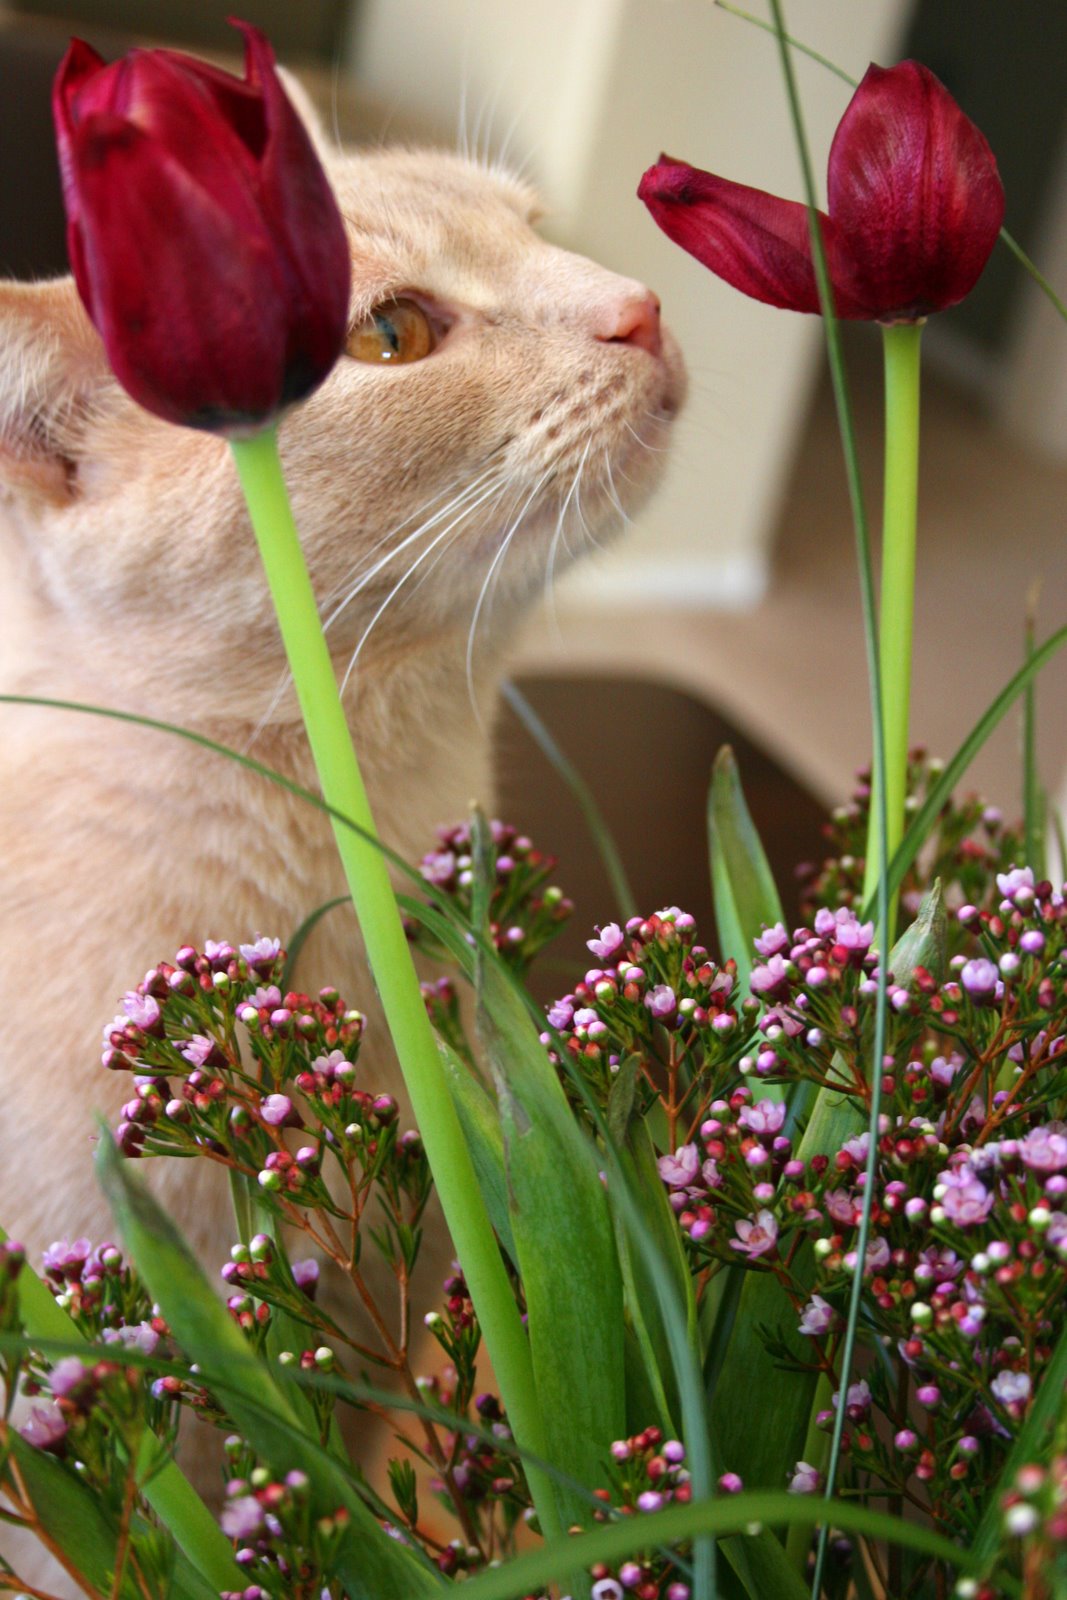 [Oliver+with+flowers+004b.jpg]